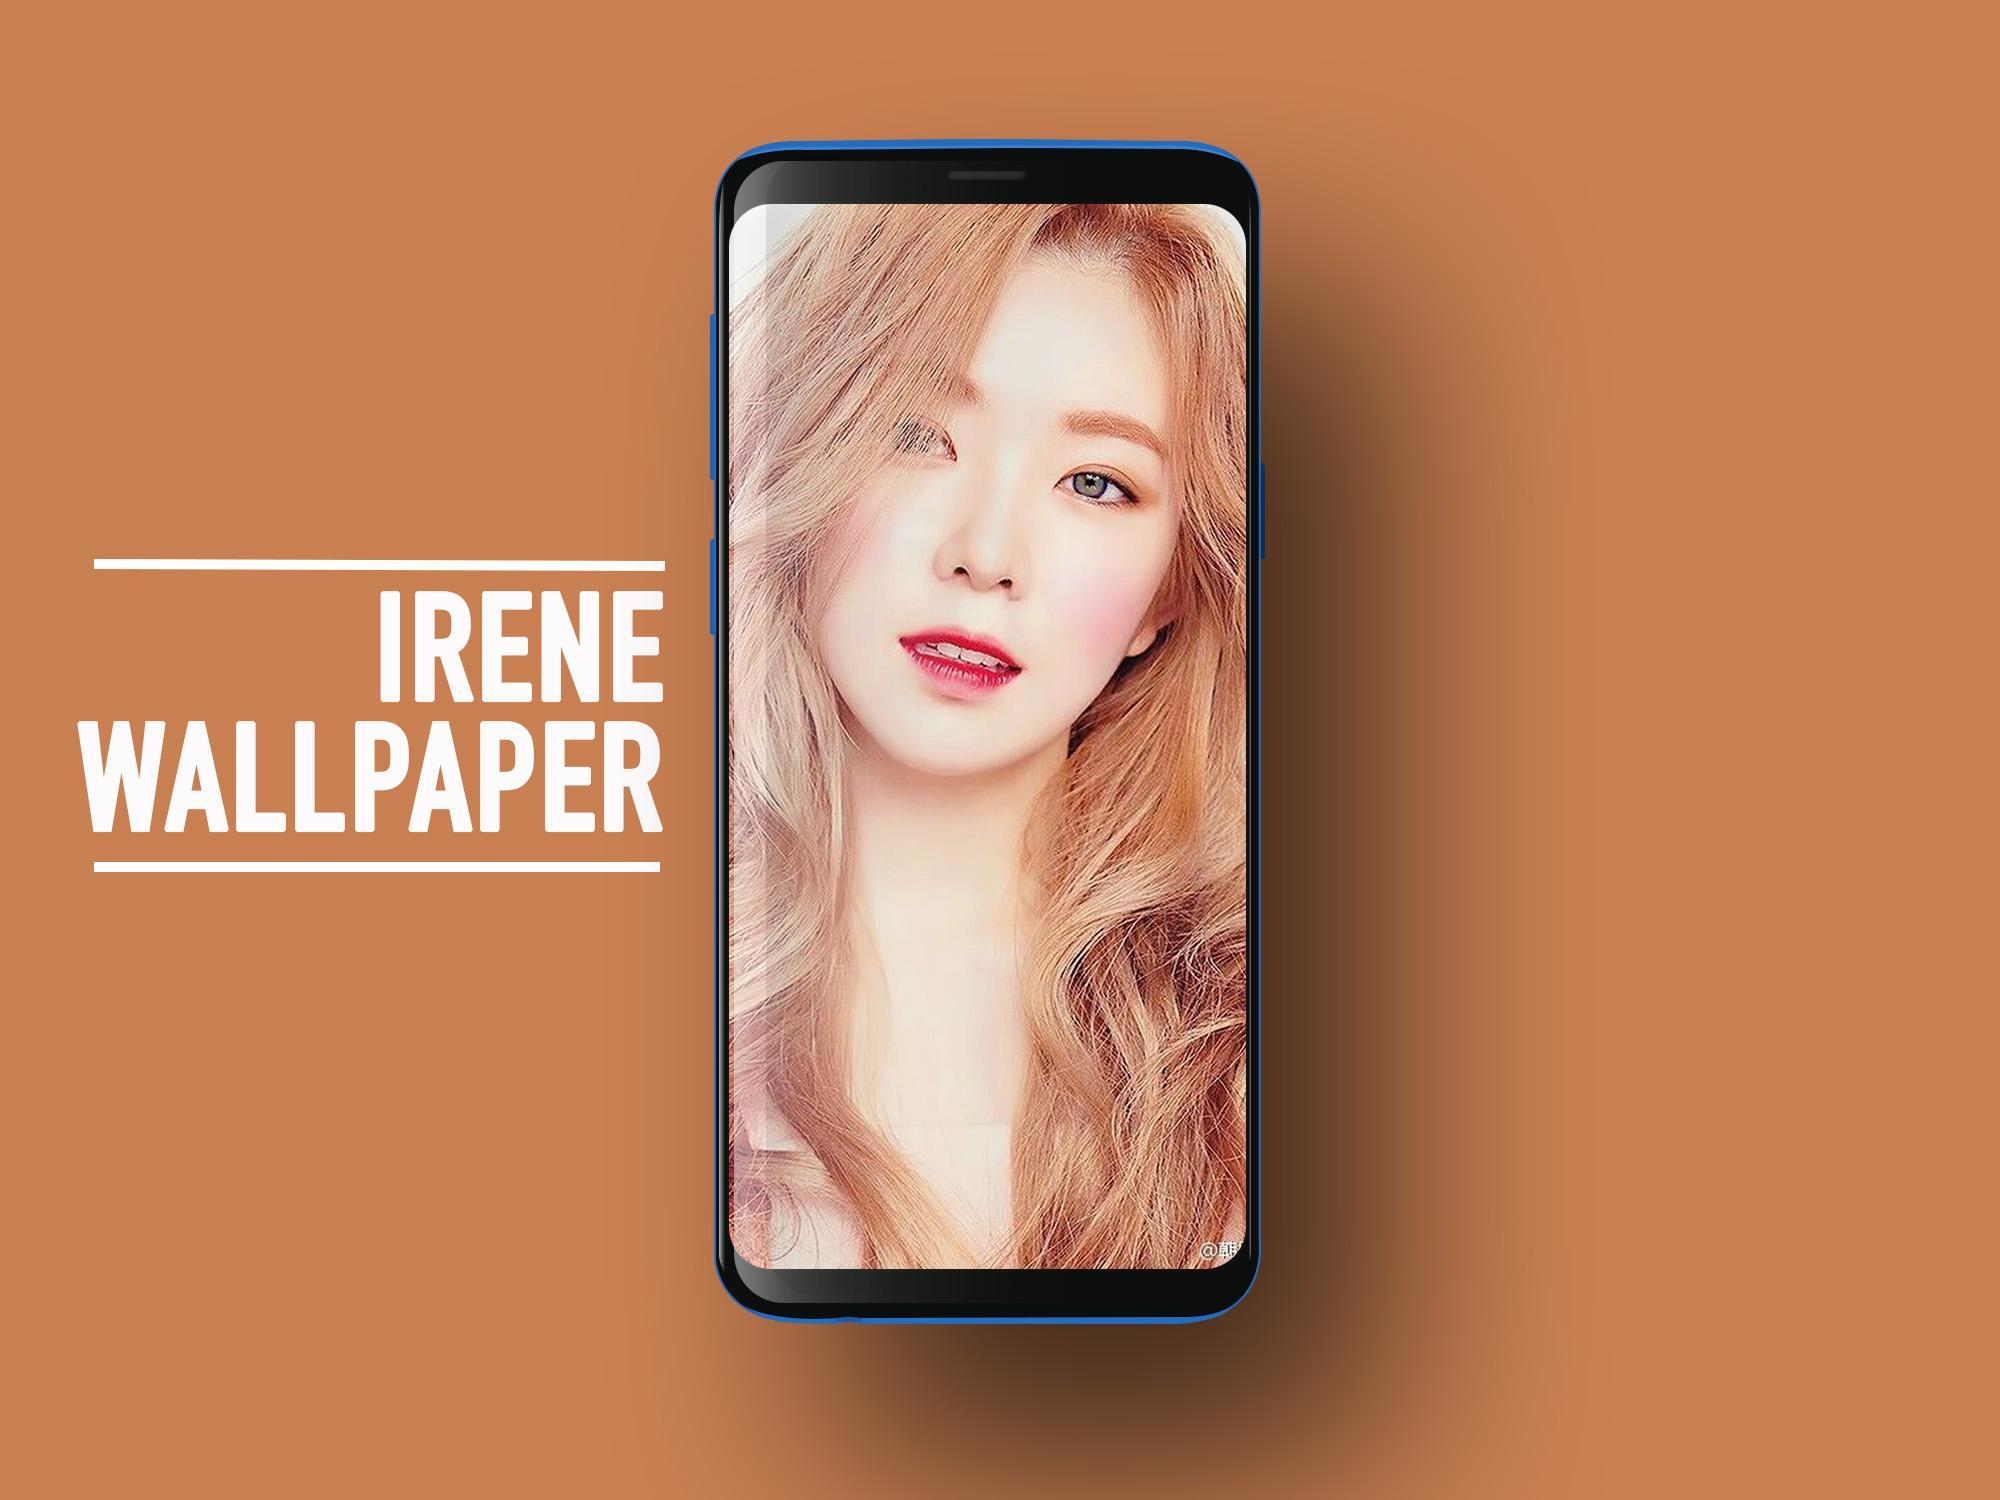 Red Velvet Irene Wallpapers Kpop Fans Hd For Android Apk Images, Photos, Reviews